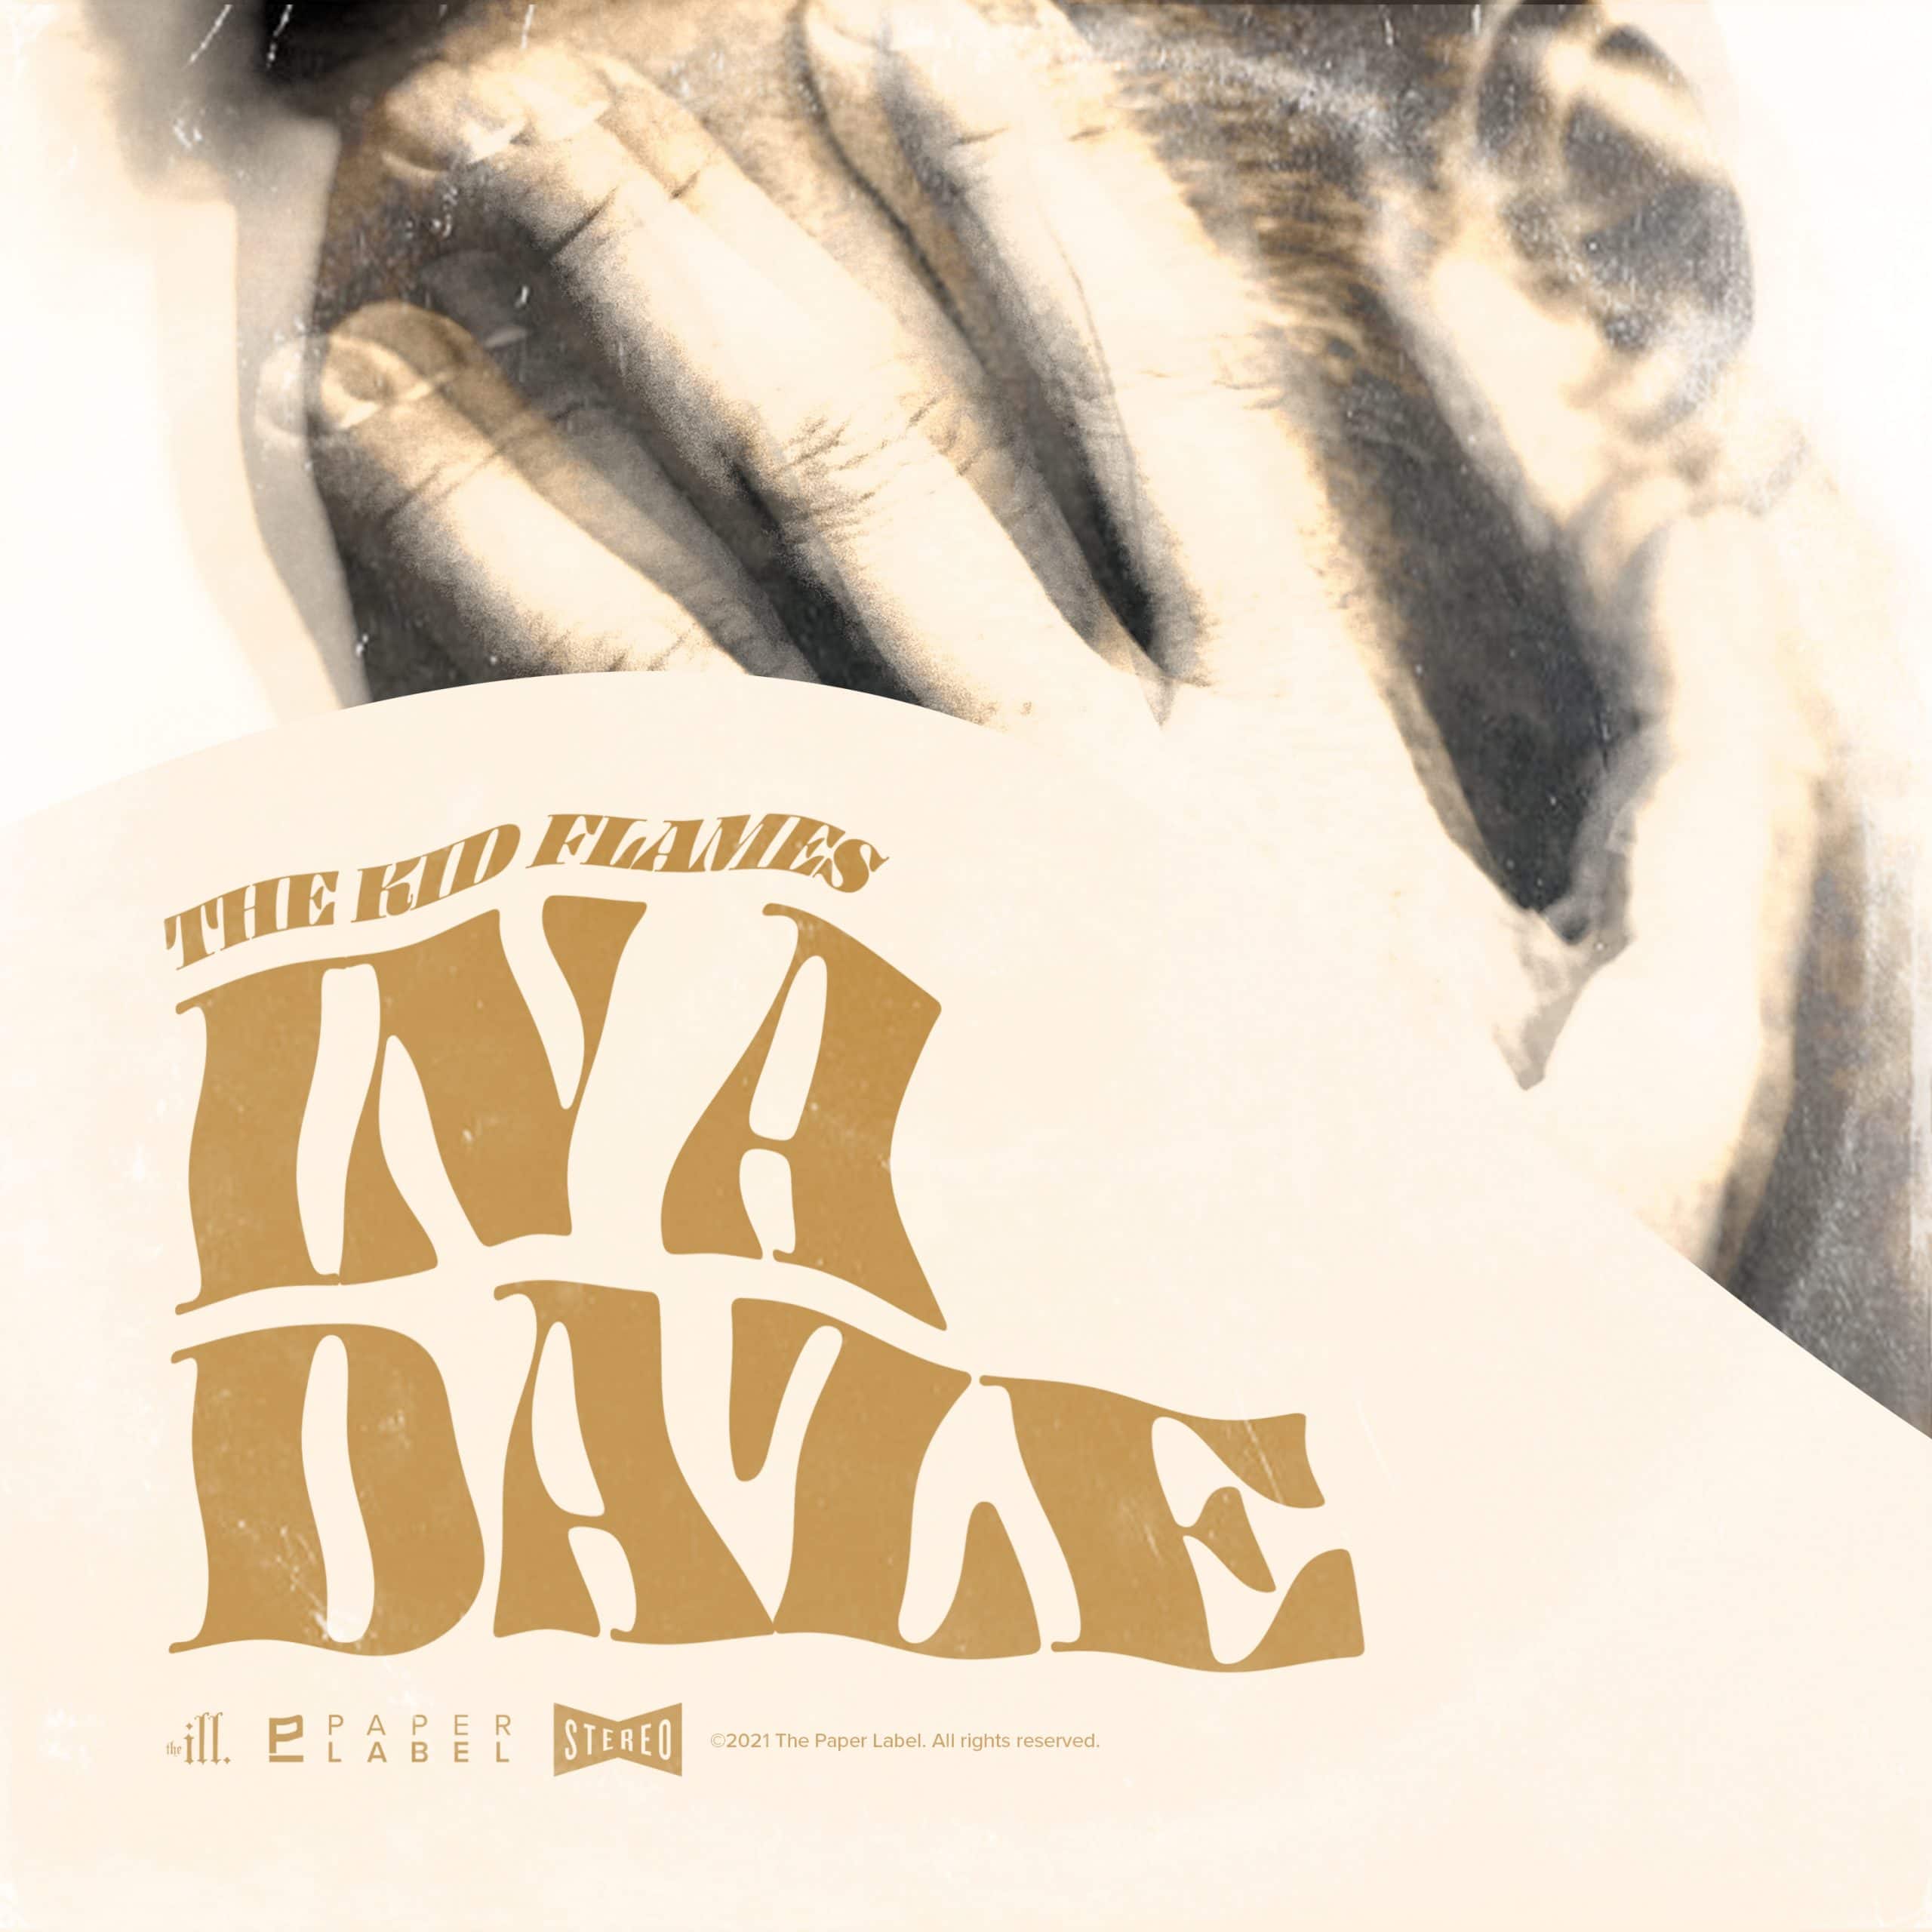 The Kid Flames "In A Daze" Single Cover